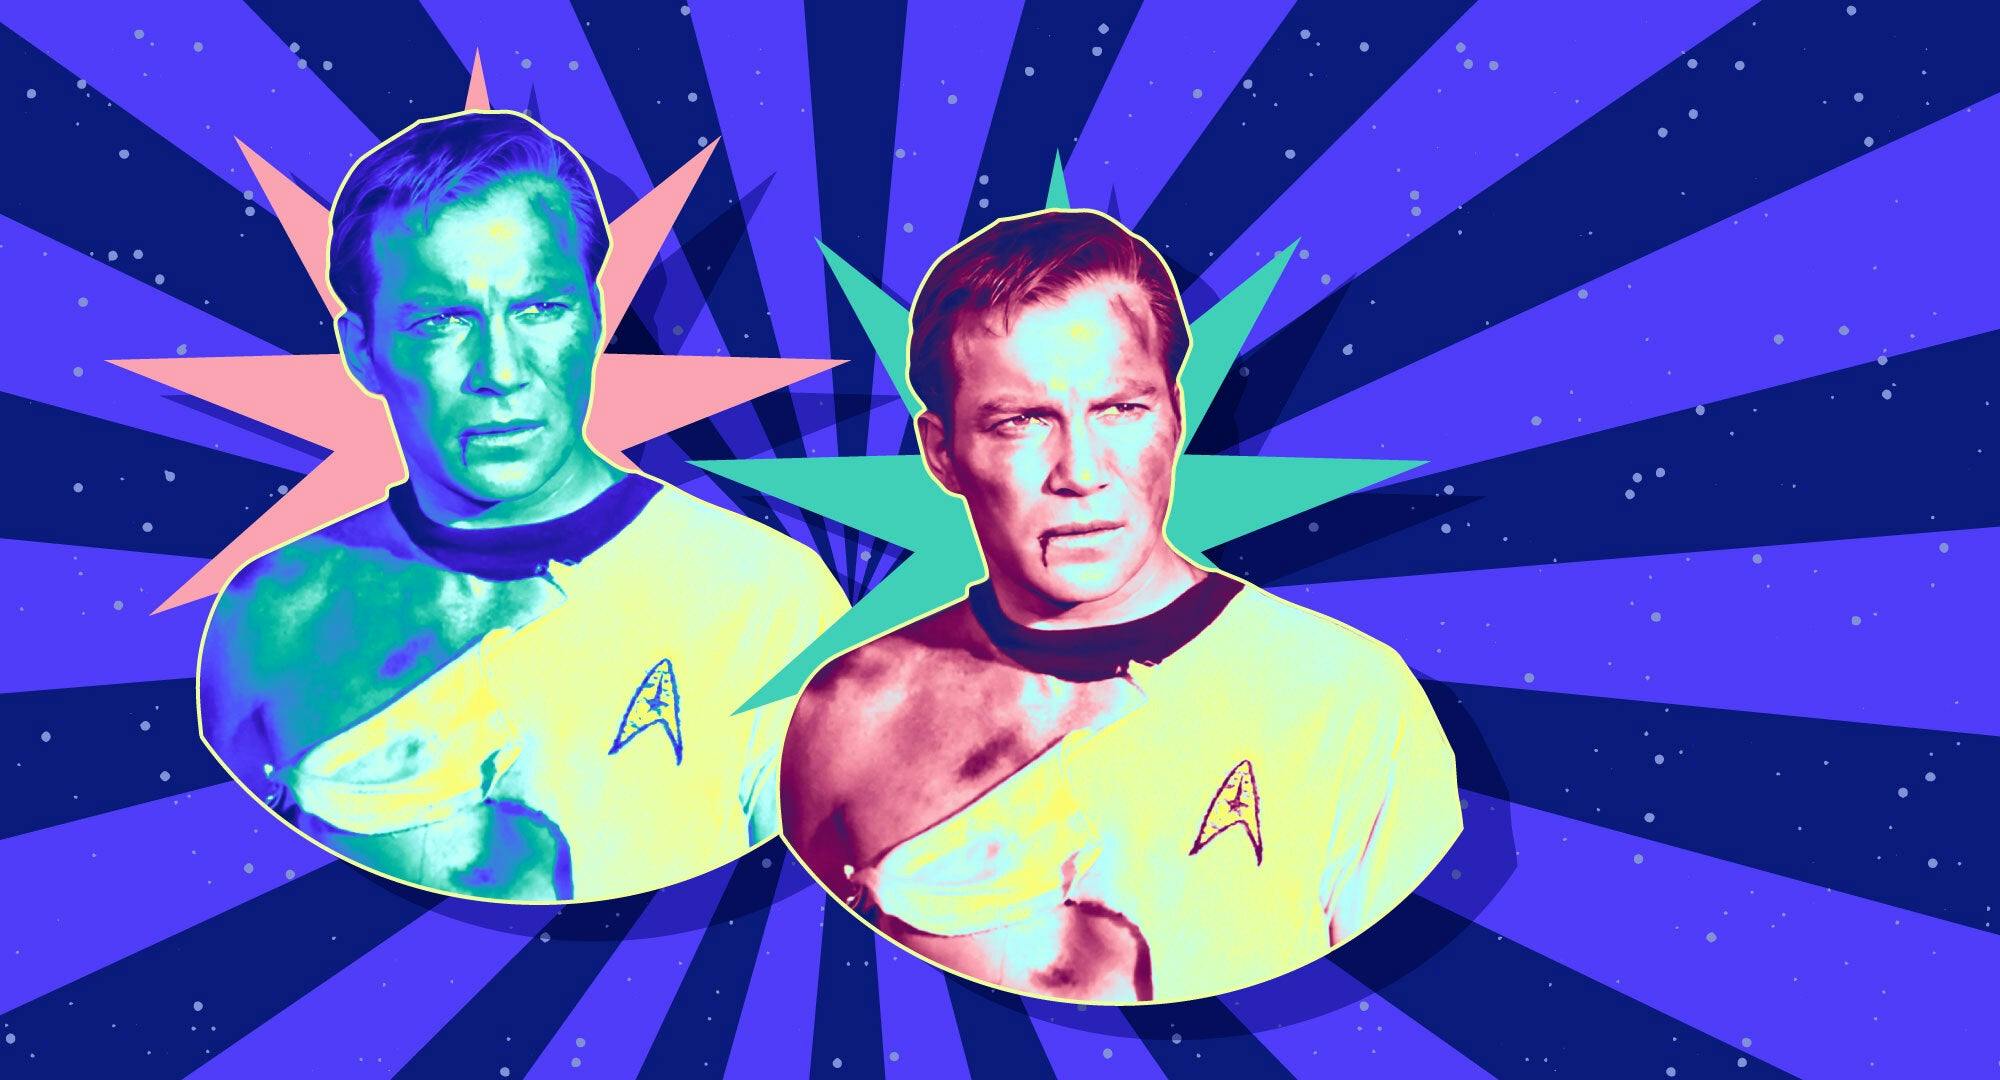 Illustrated banner featuring a bruised James T. Kirk with his shirt ripped